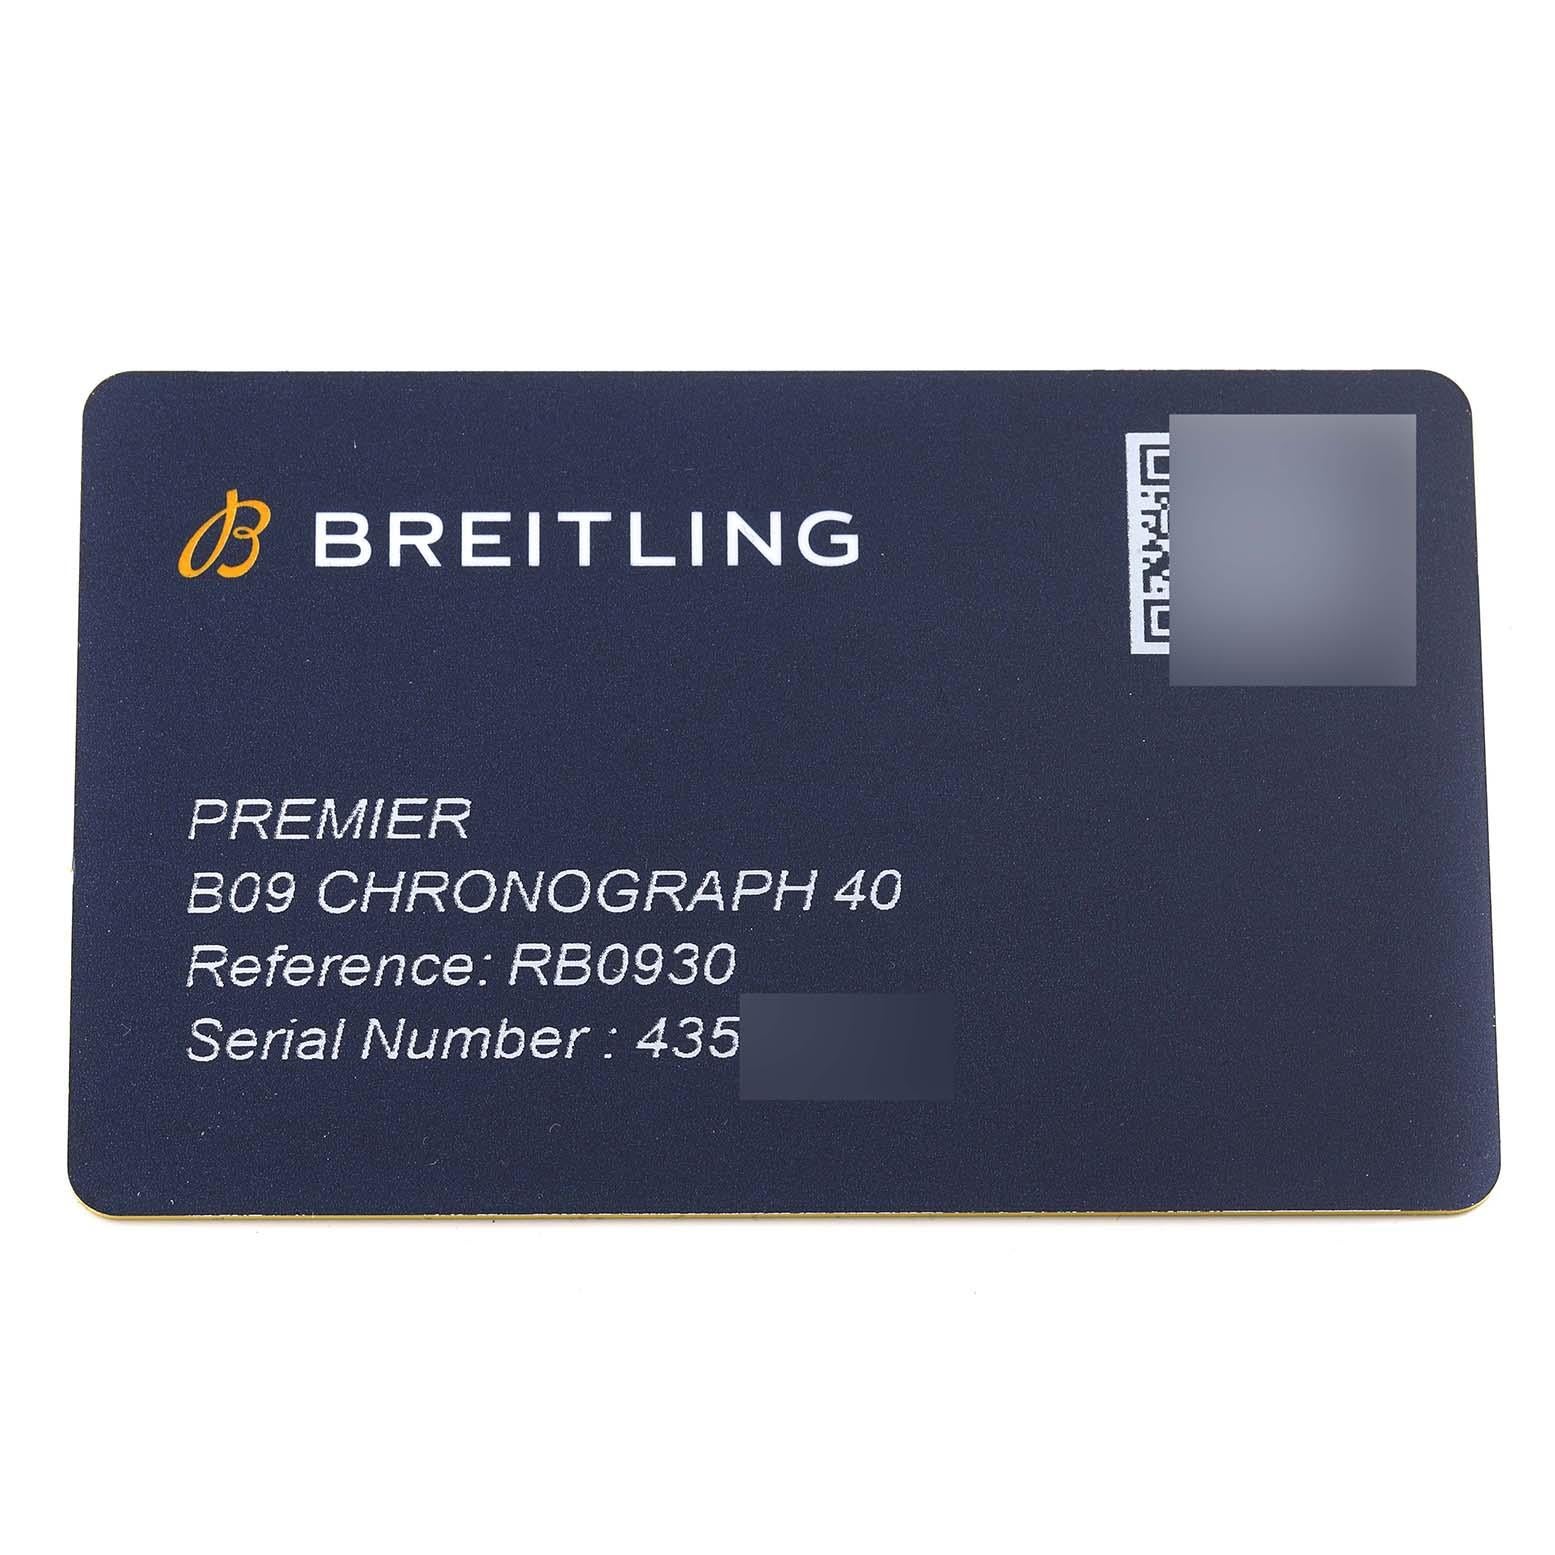 Breitling Premier B09 Chronograph 40 Rose Gold Mens Watch RB0930 Box Card For Sale 3